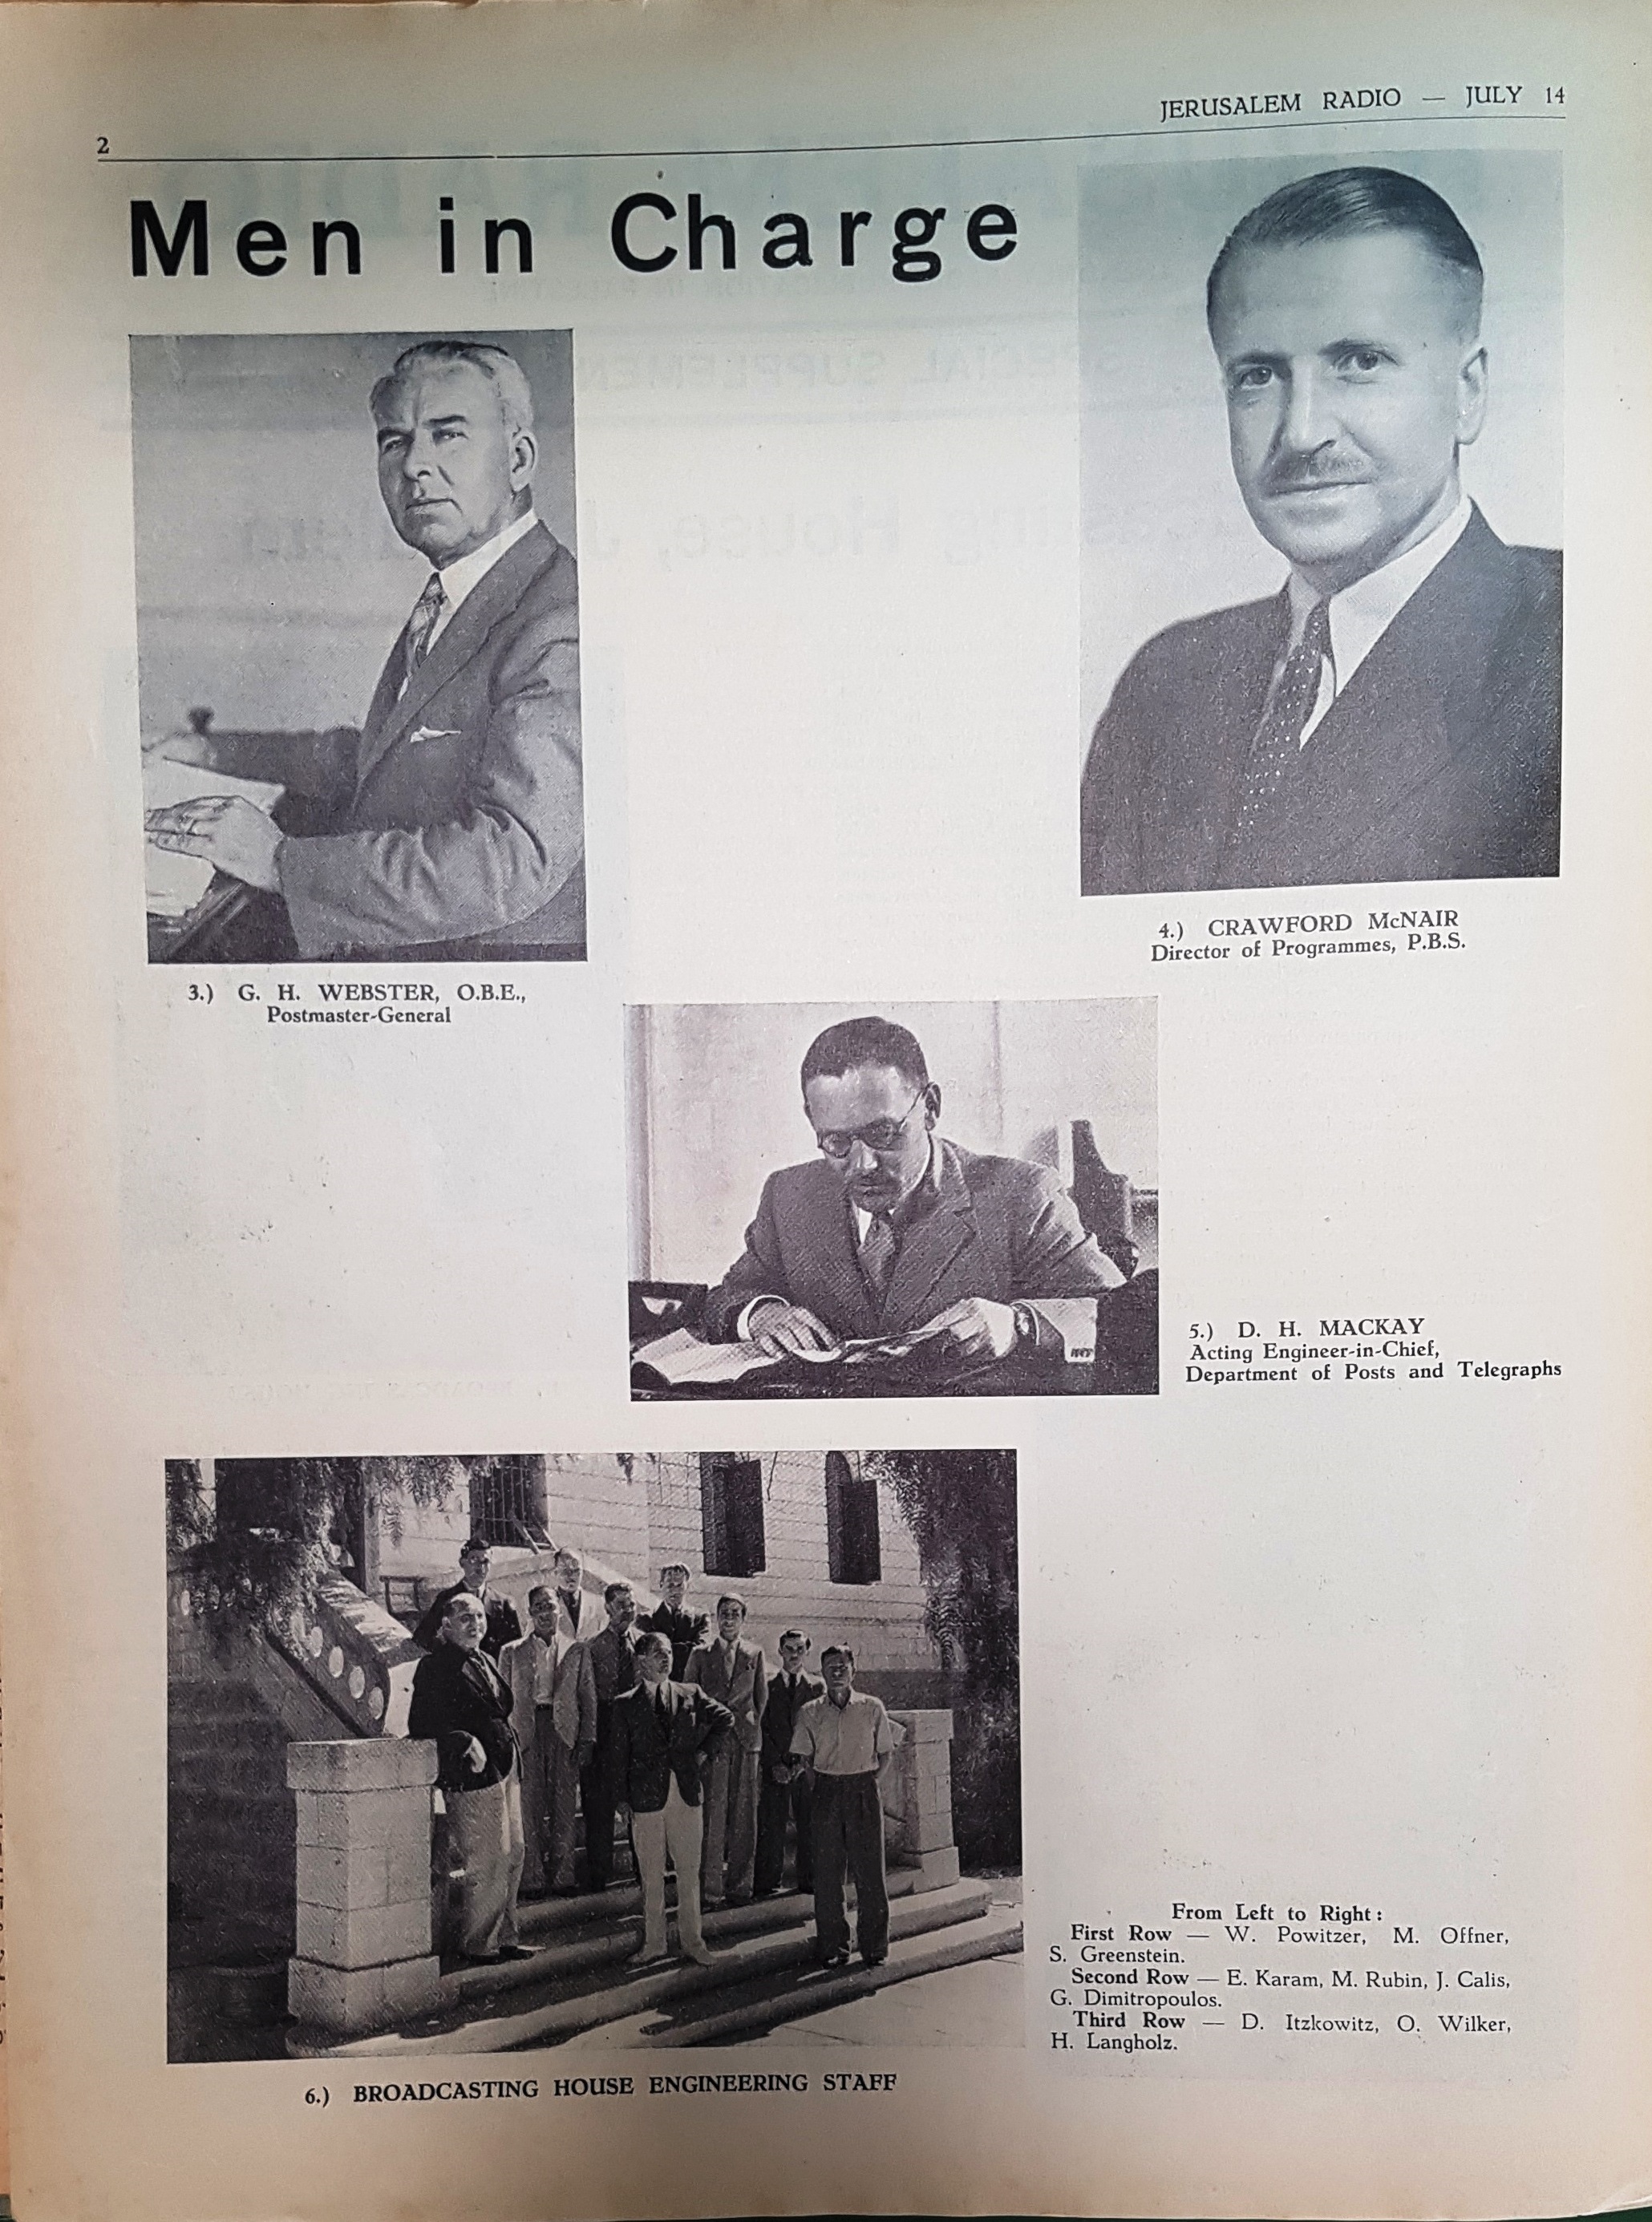 Jerusalem Radio:  Volume 2 No. 29,  Friday, July  14, 1939 page 2 : Persons in Charge